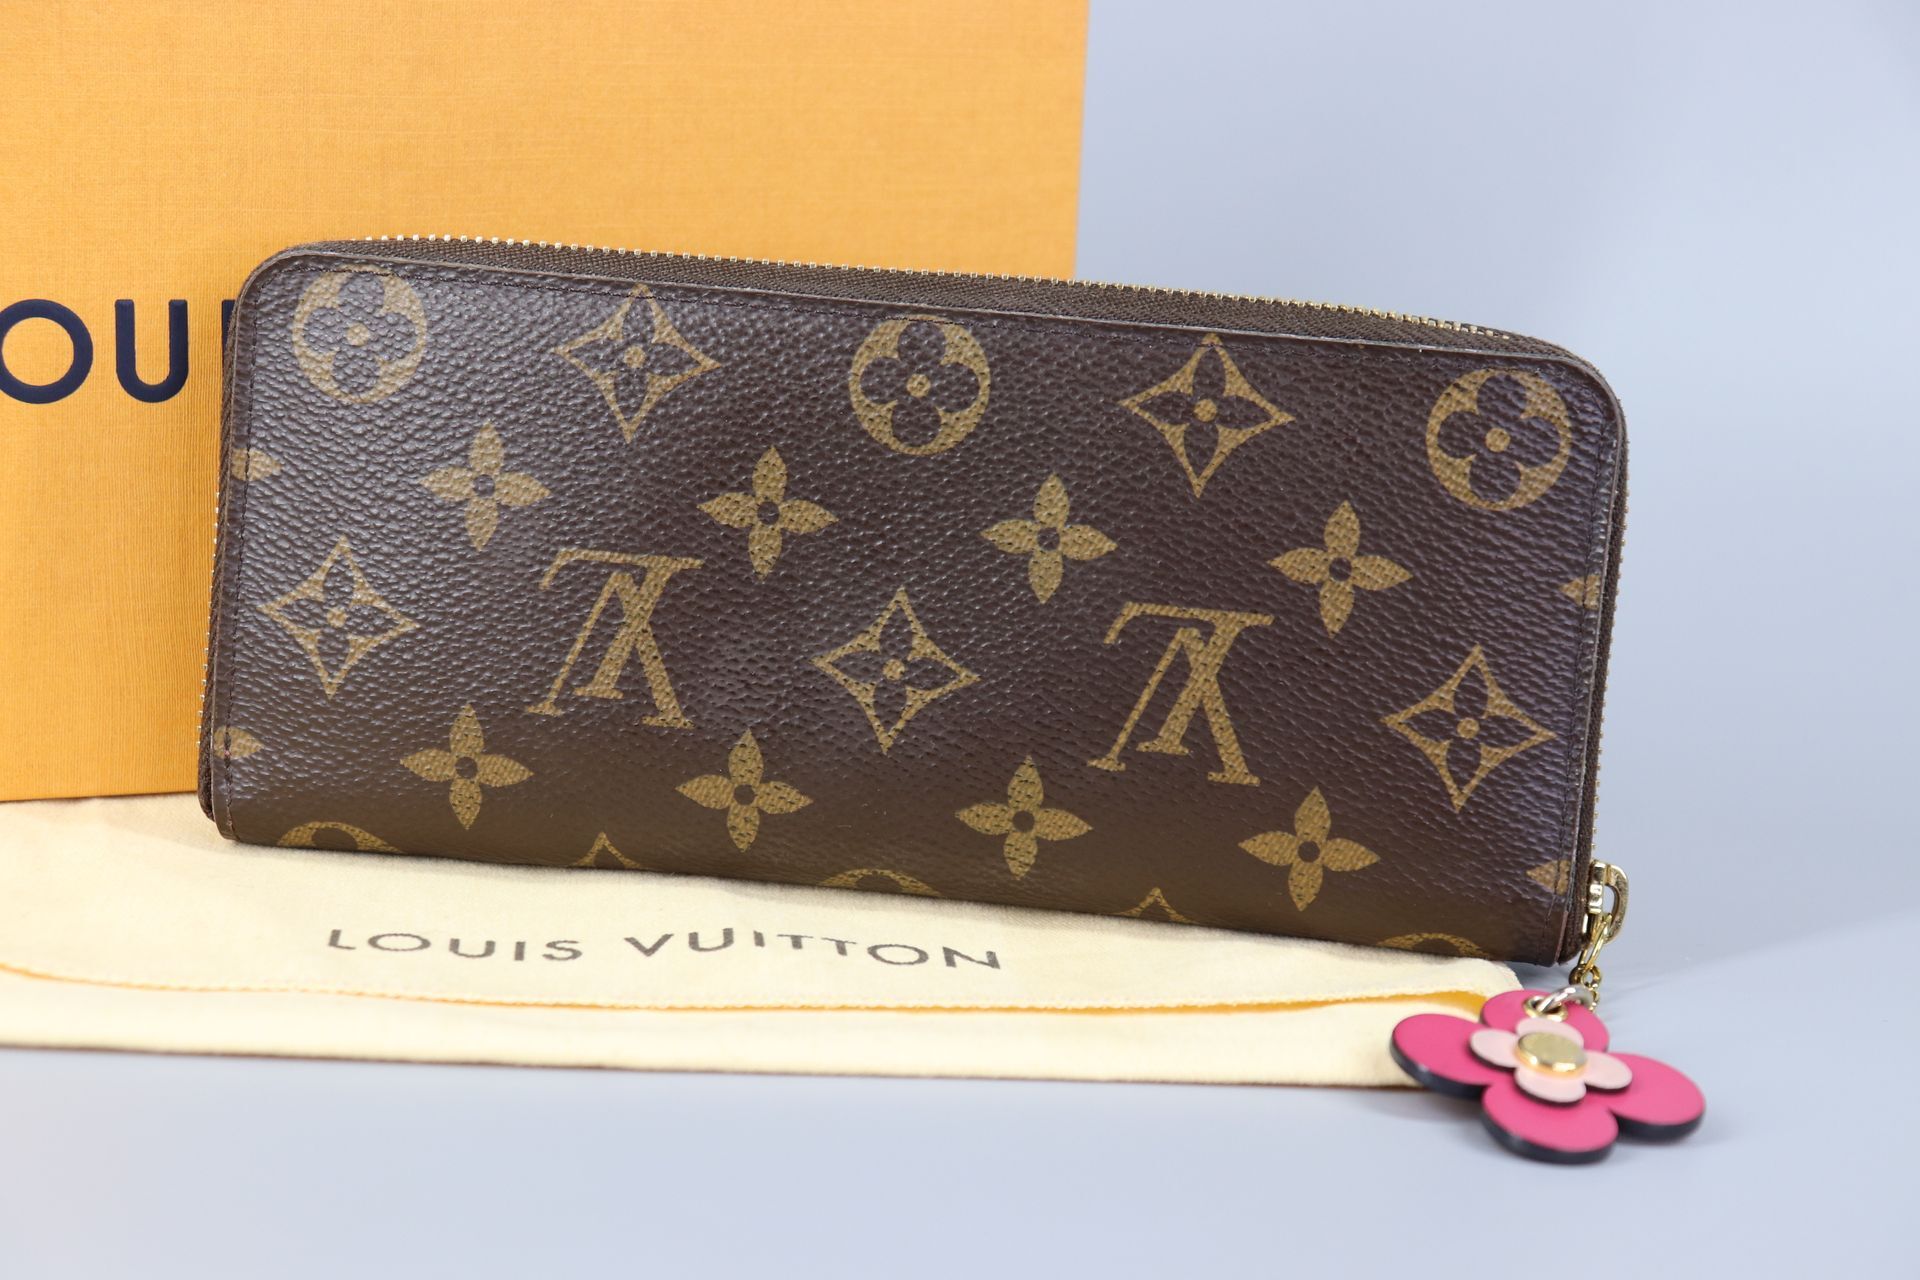 This Louis Vuitton Monogram Canvas Clemence Wallet isn't all about